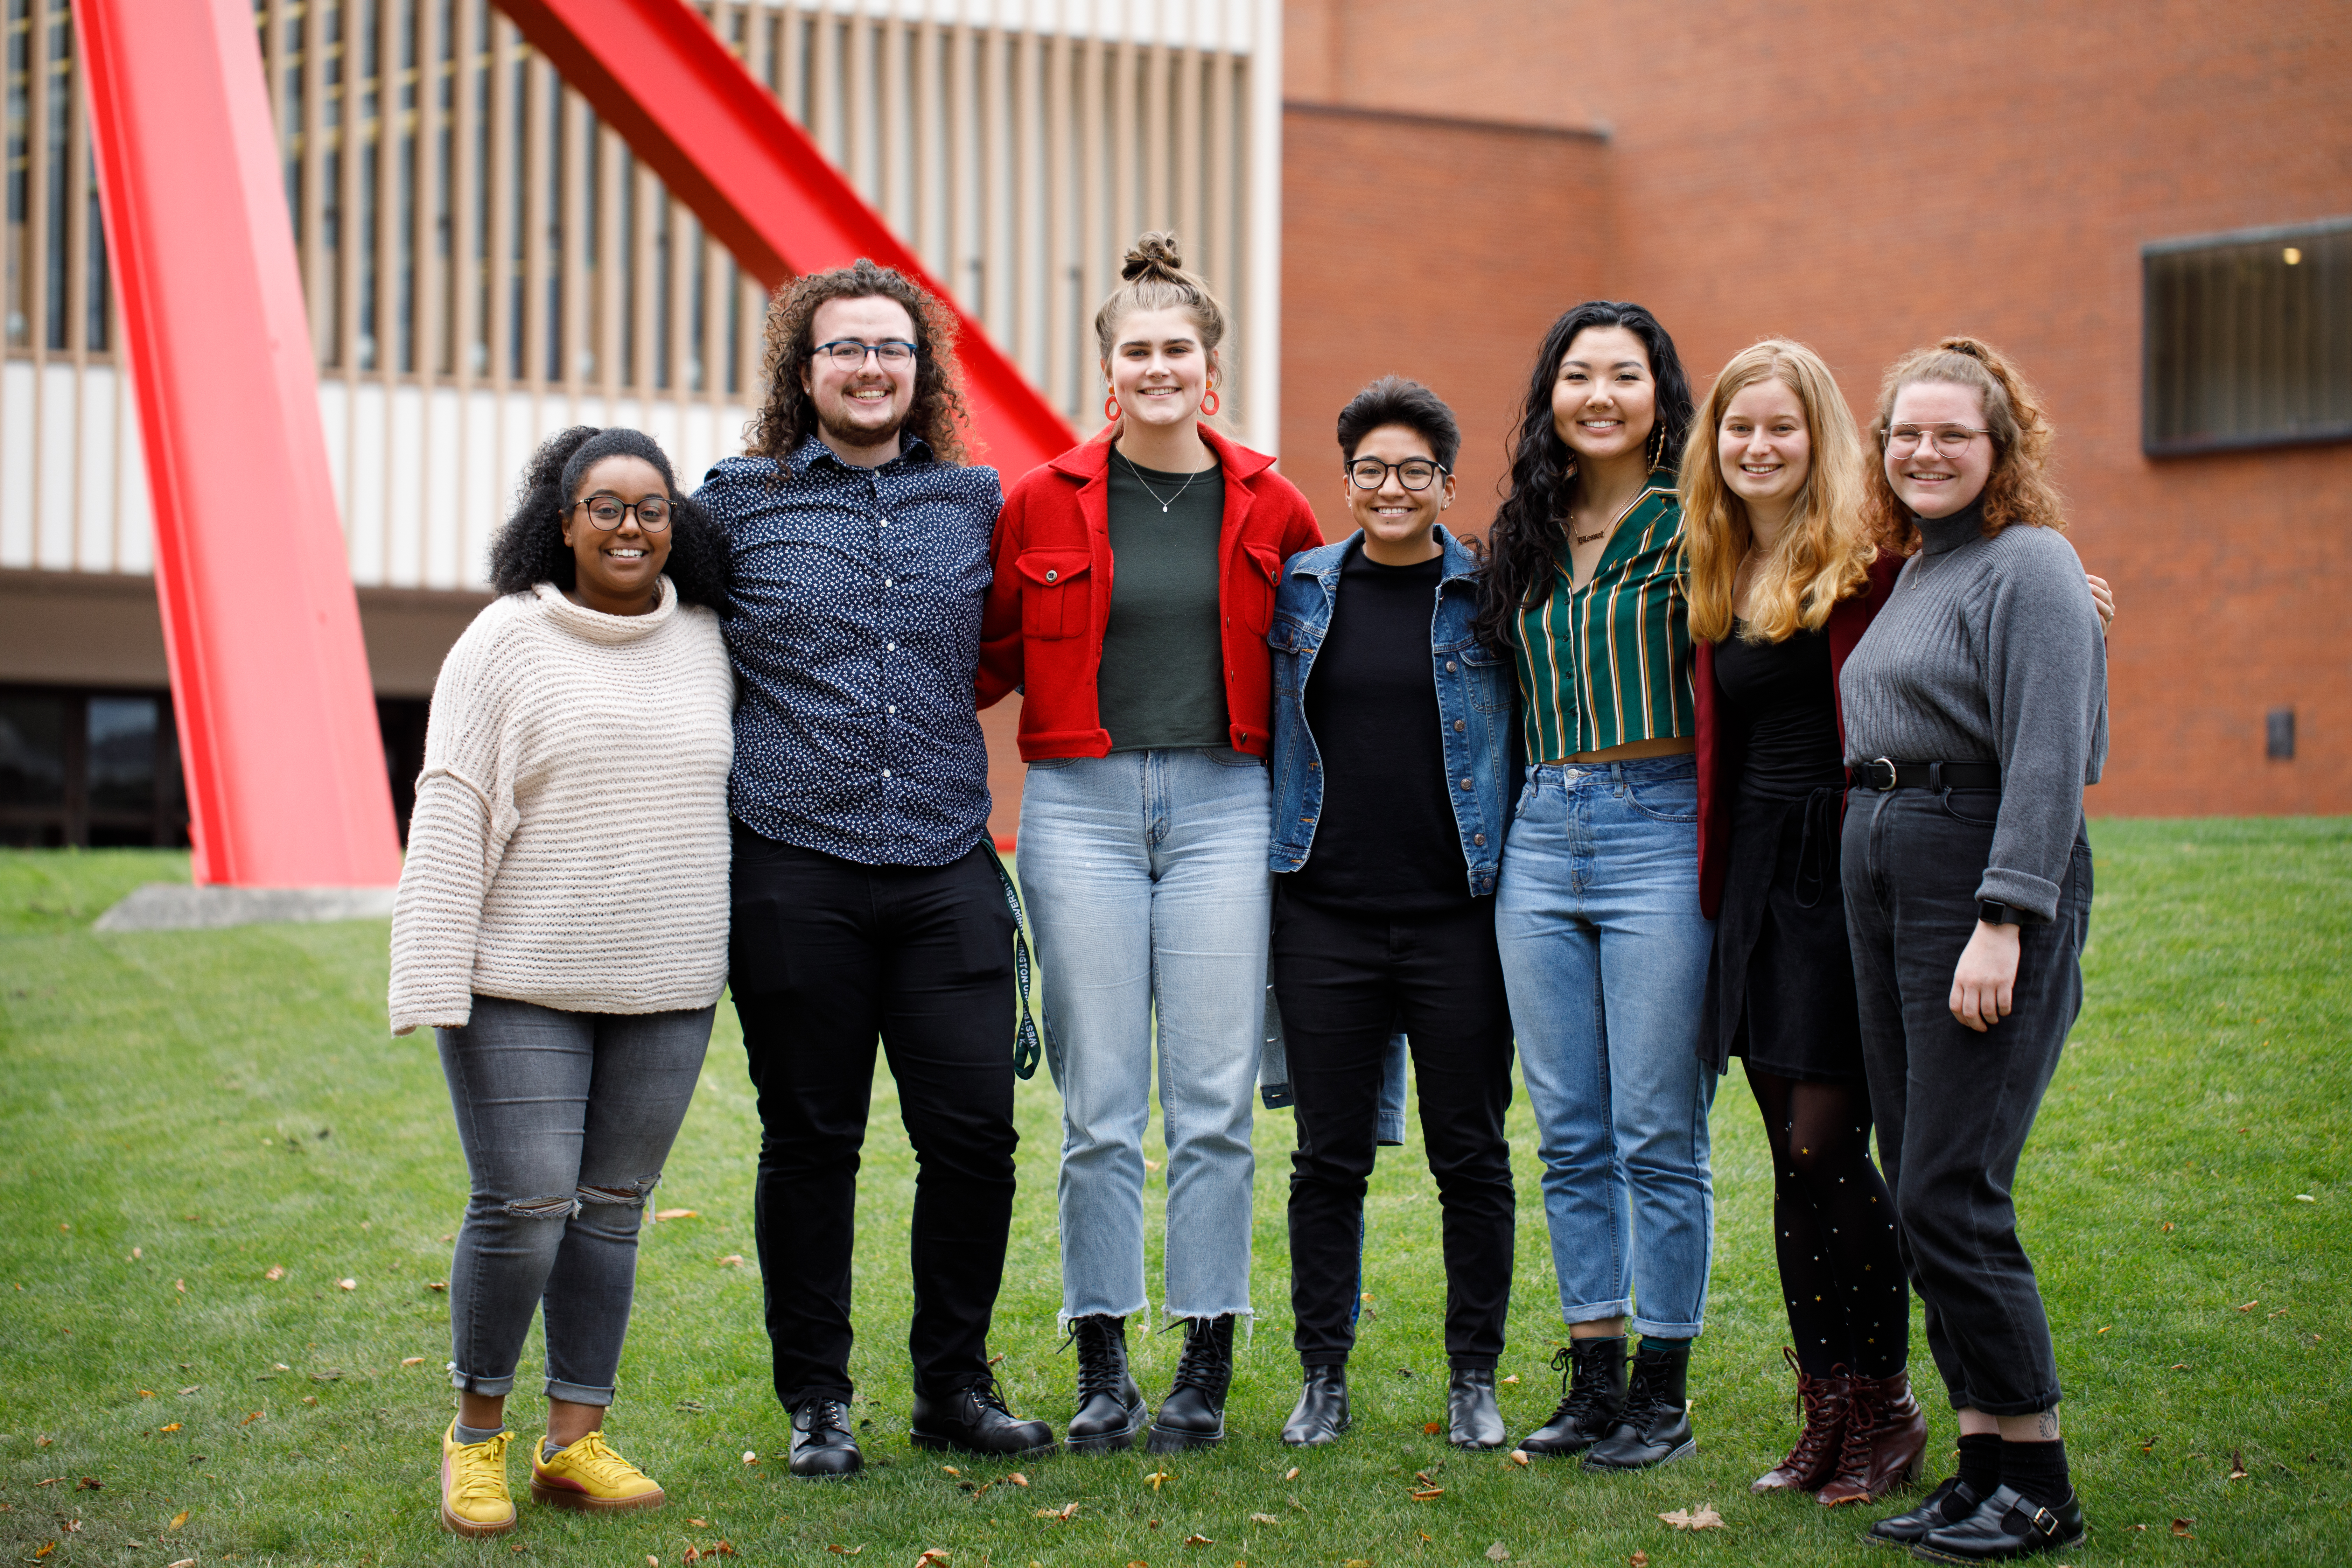 AS Board members: Selome Zerai, Trever Mullins, Grace Drechsel, Lani Defiesta, Yesugen Battsengel, Adah Barenburg and Emily Gerhardt stand in front of the Performing Art Center green space, smiling for their group photo.